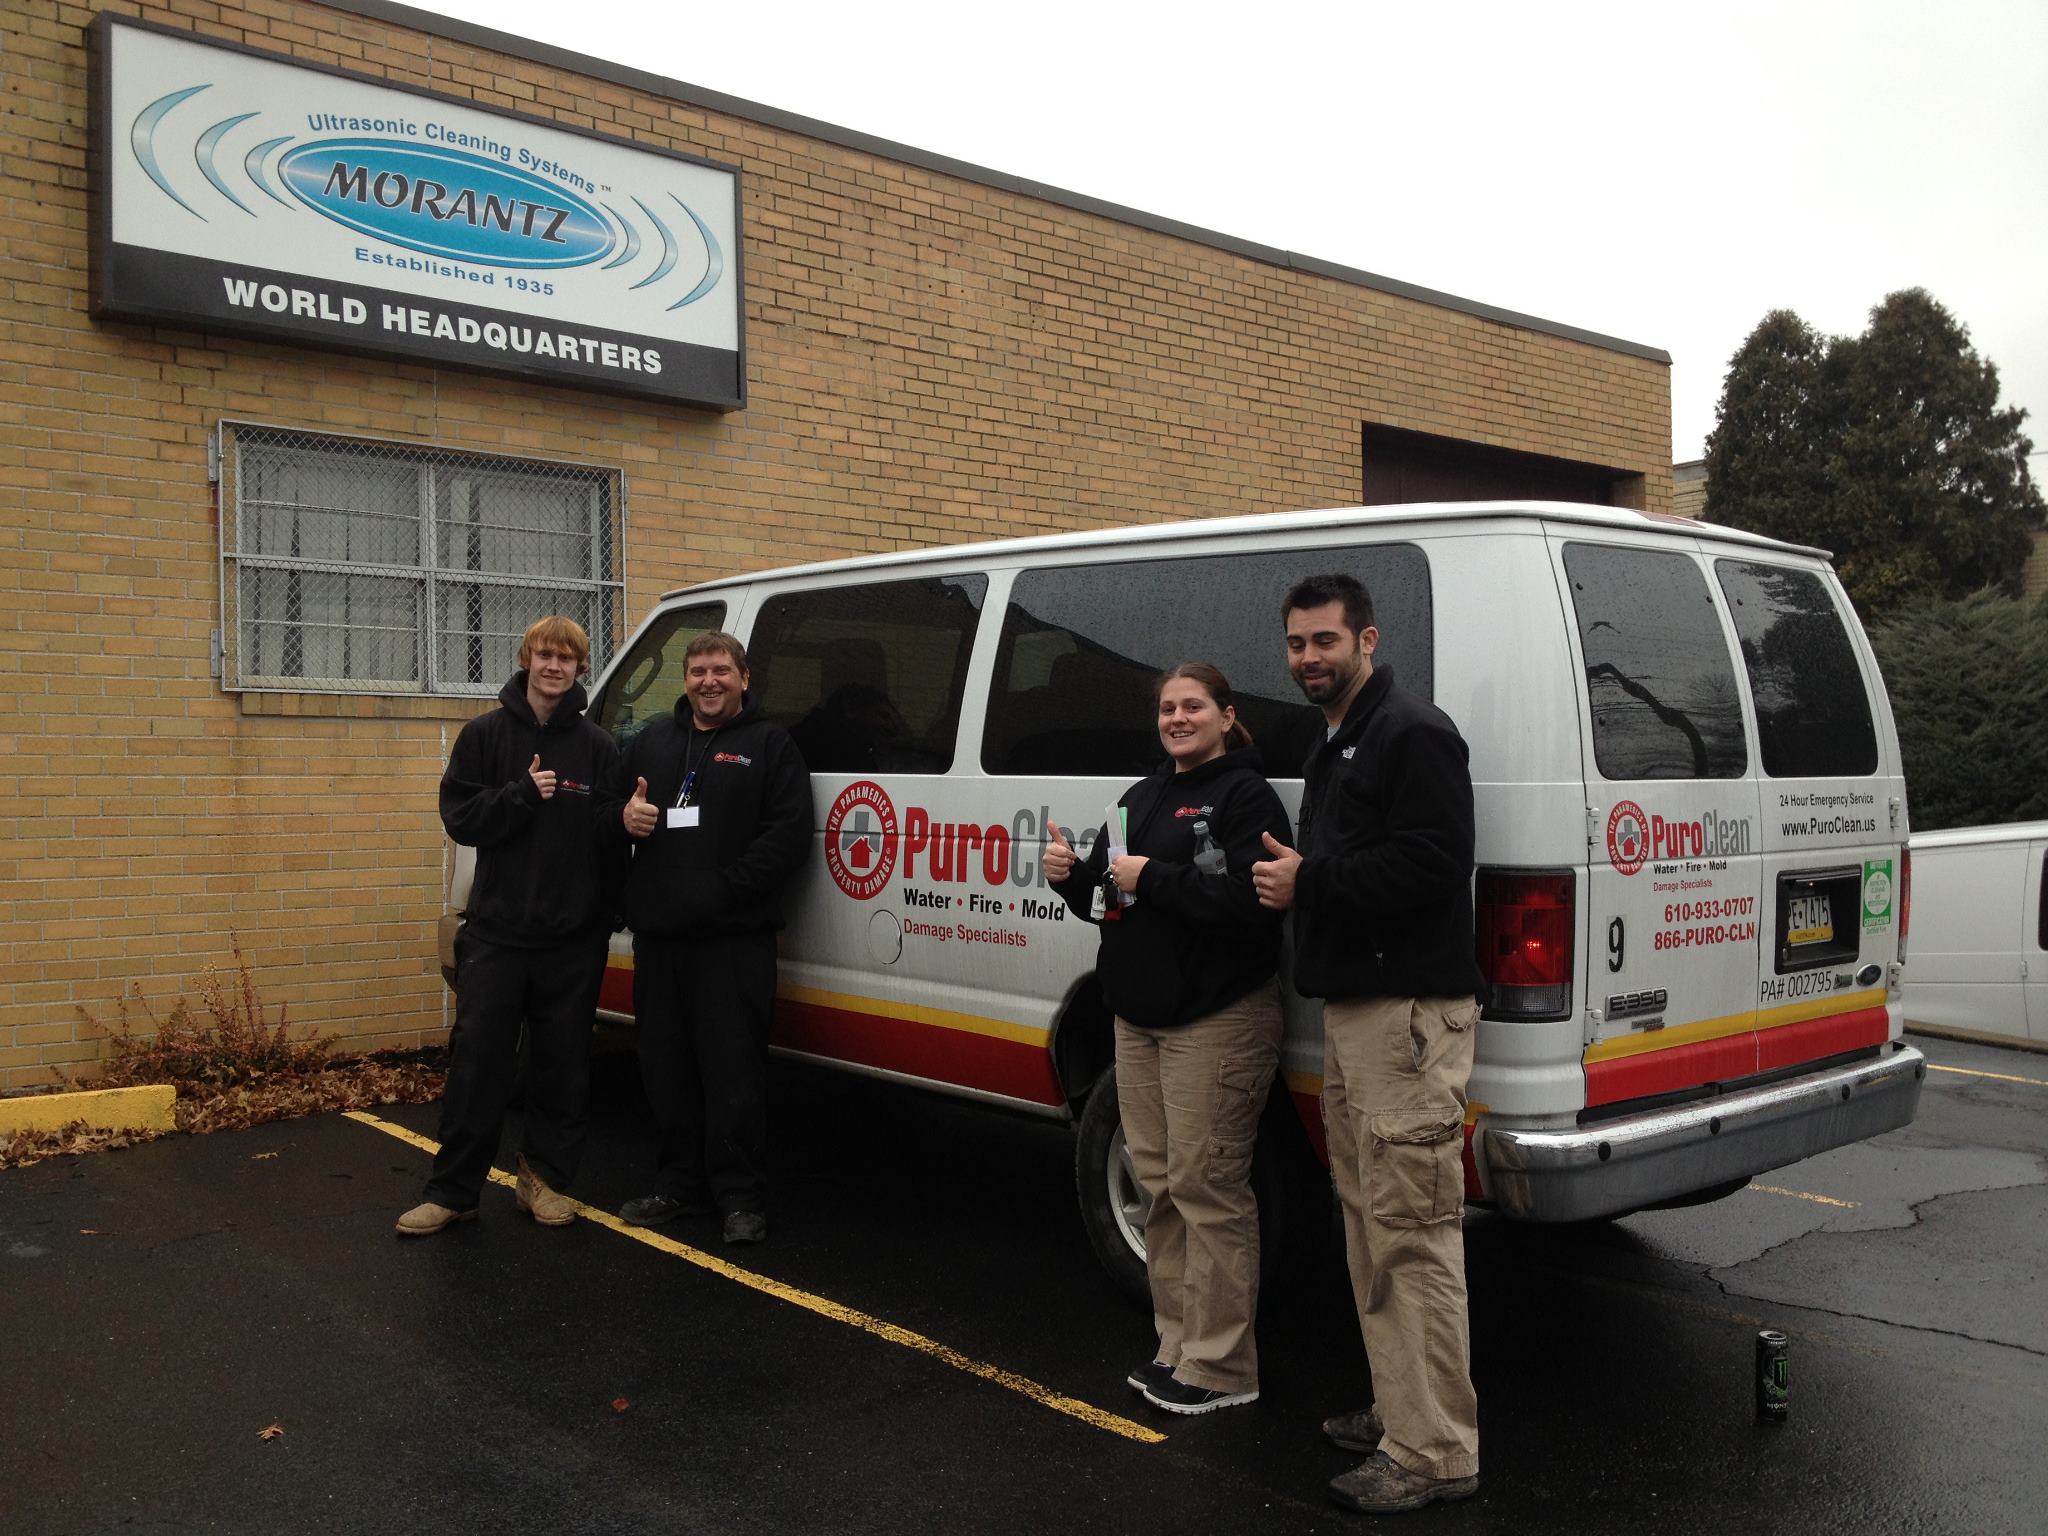 PuroClean of Phoenixville Chooses Morantz Ultrasonics for their Contents Cleaning Facility